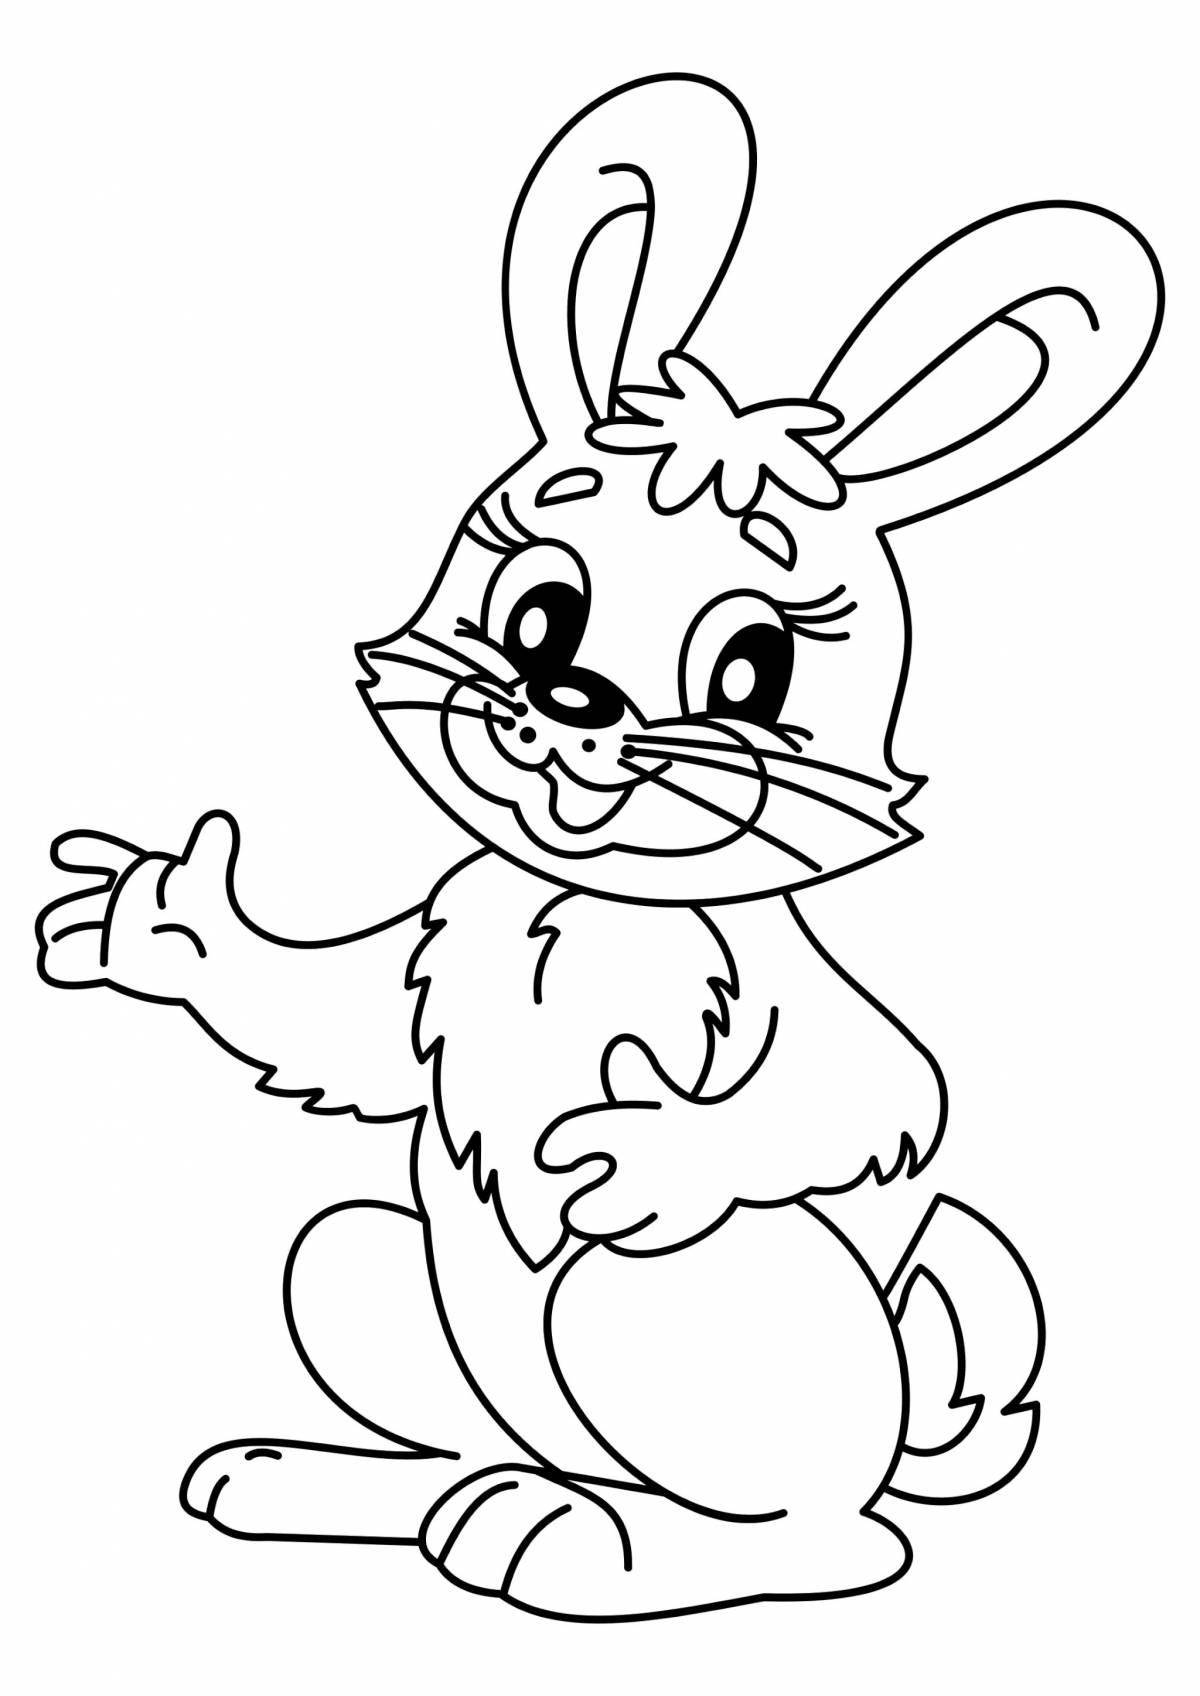 Snuggly coloring page print bunny